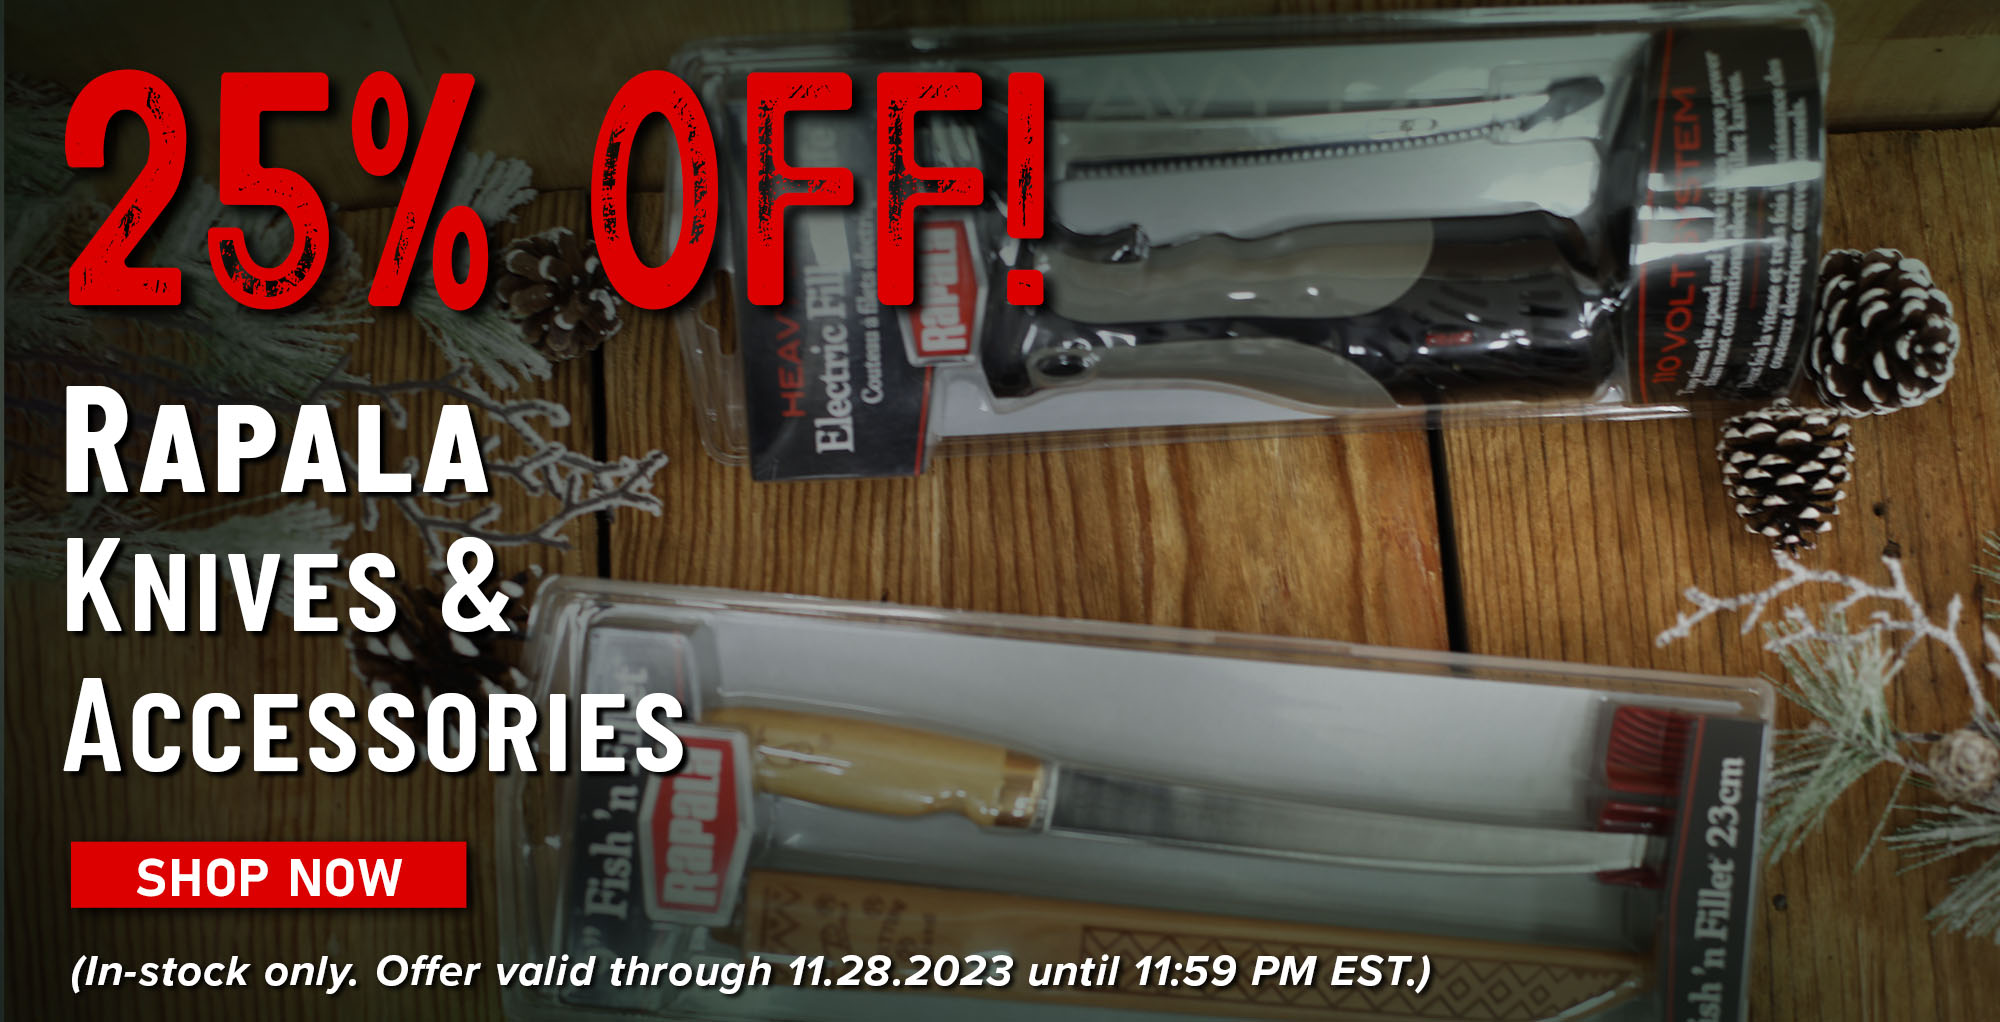 25% Off! Rapala Knives & Accessories Shop Now (In-stock only. Offer valid through 11.28.2023 until 11:59 PM EST.)